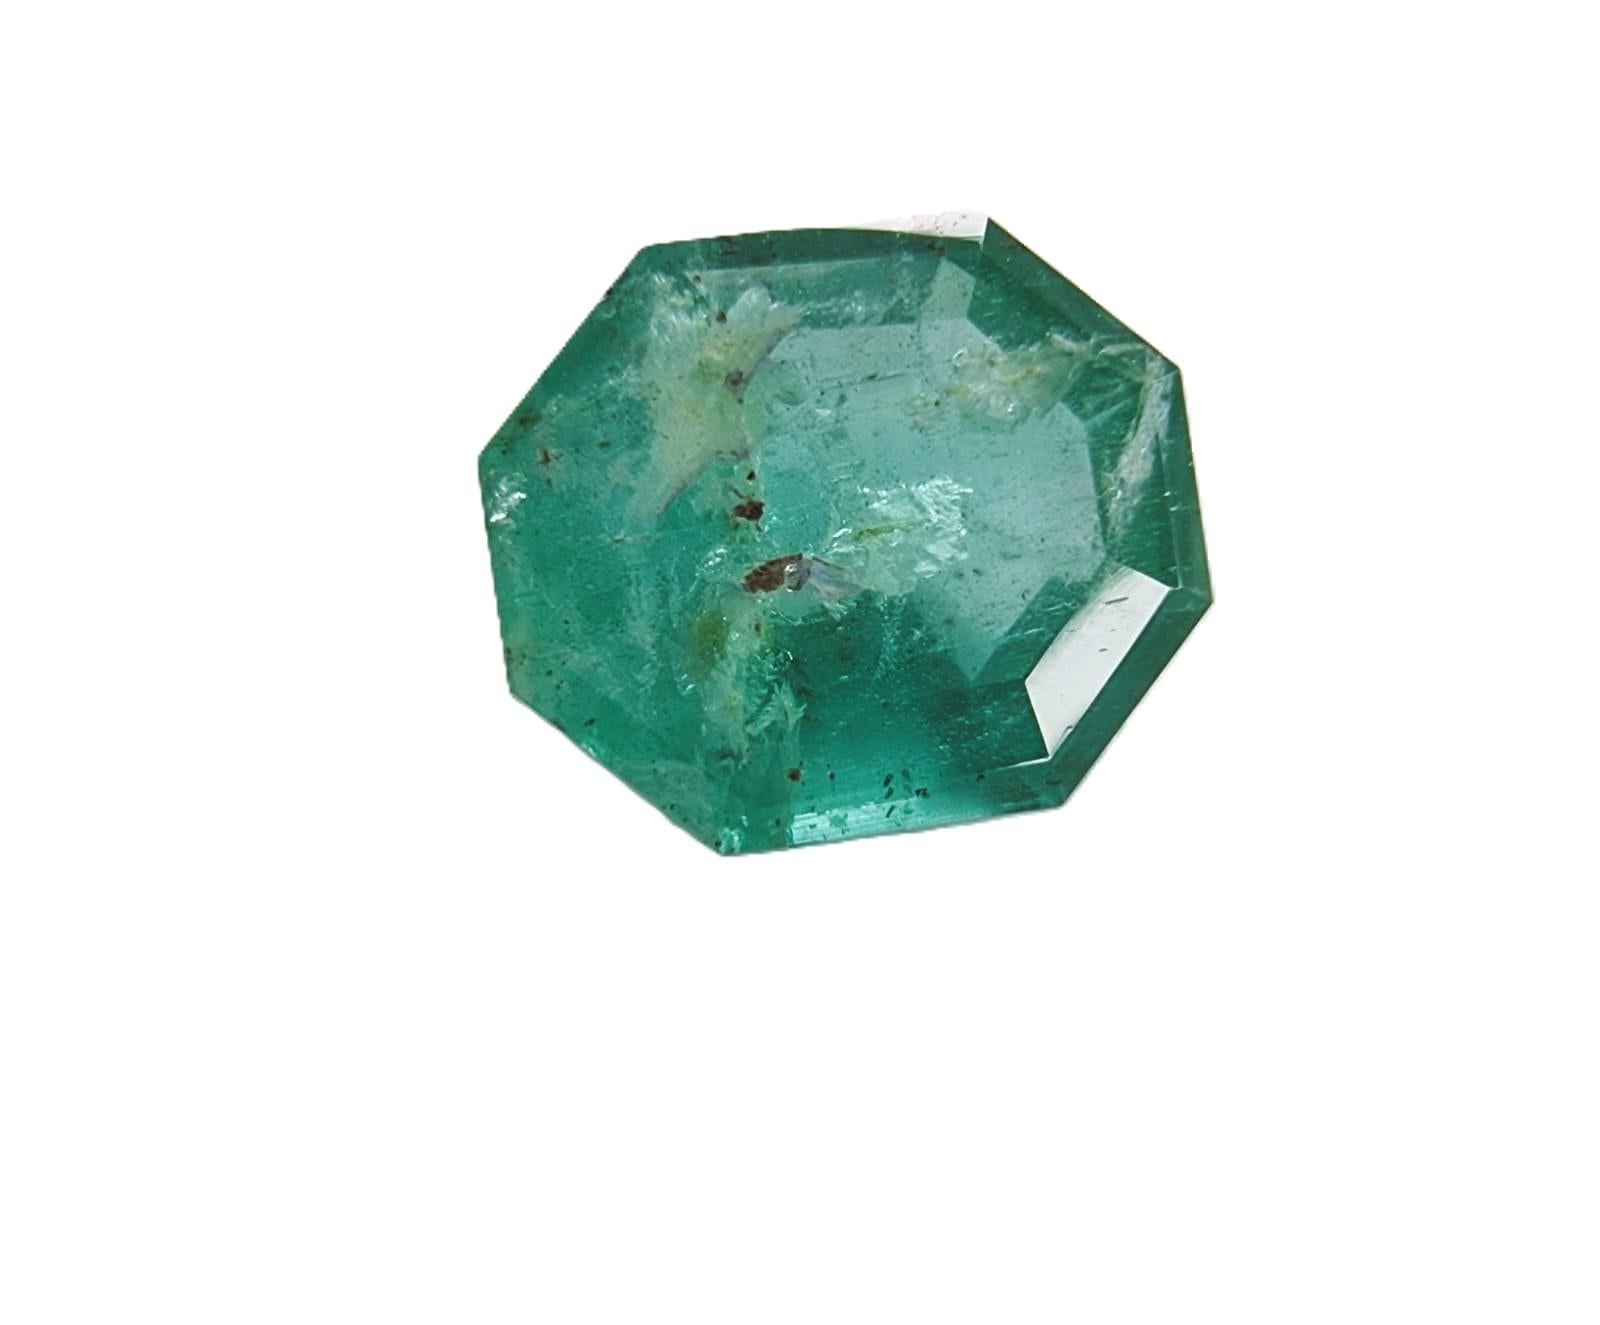 Artisan NO RESERVE 2.02ct Octagonal Cut NO-OIL Natural Untreated EMERALD Gemstone For Sale